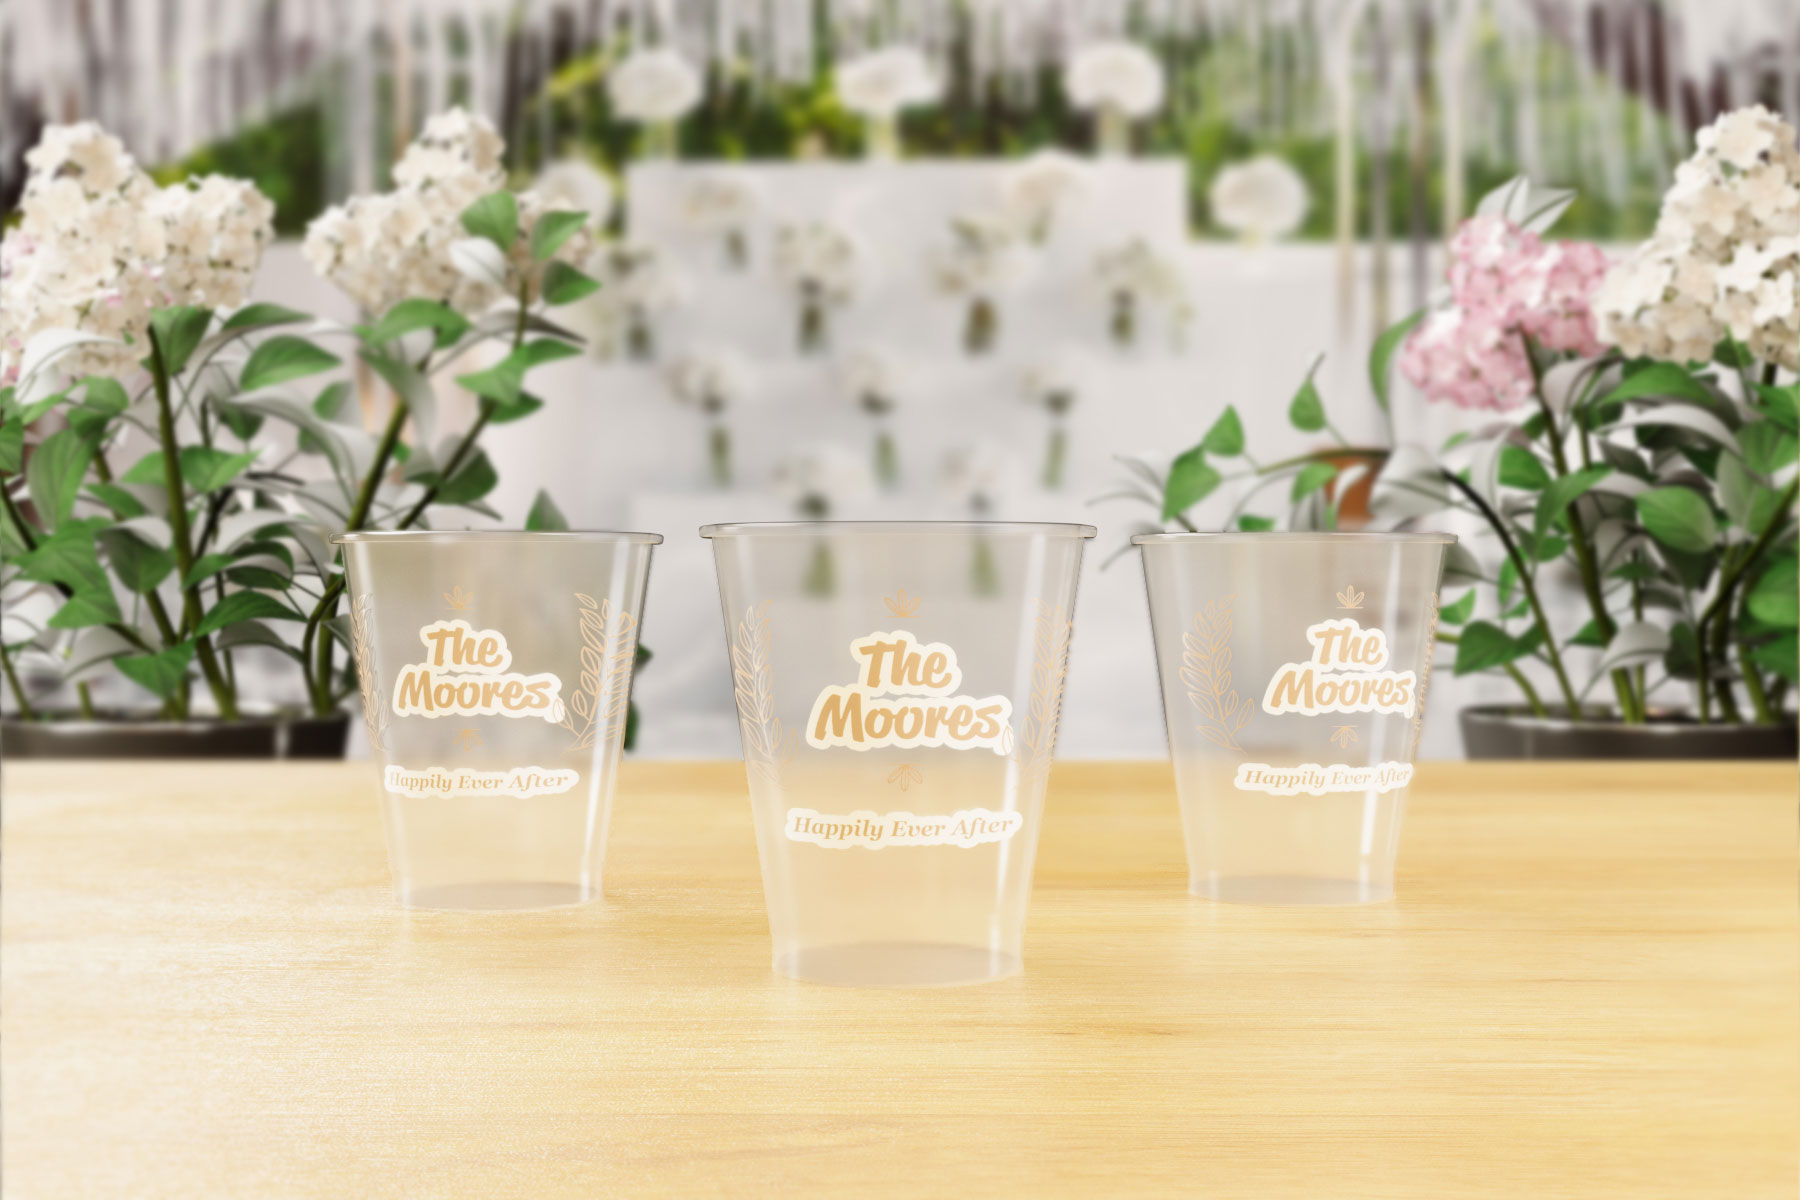 Wedding Cups: Our Top 5 Customizable Cup Picks for Your Wedding